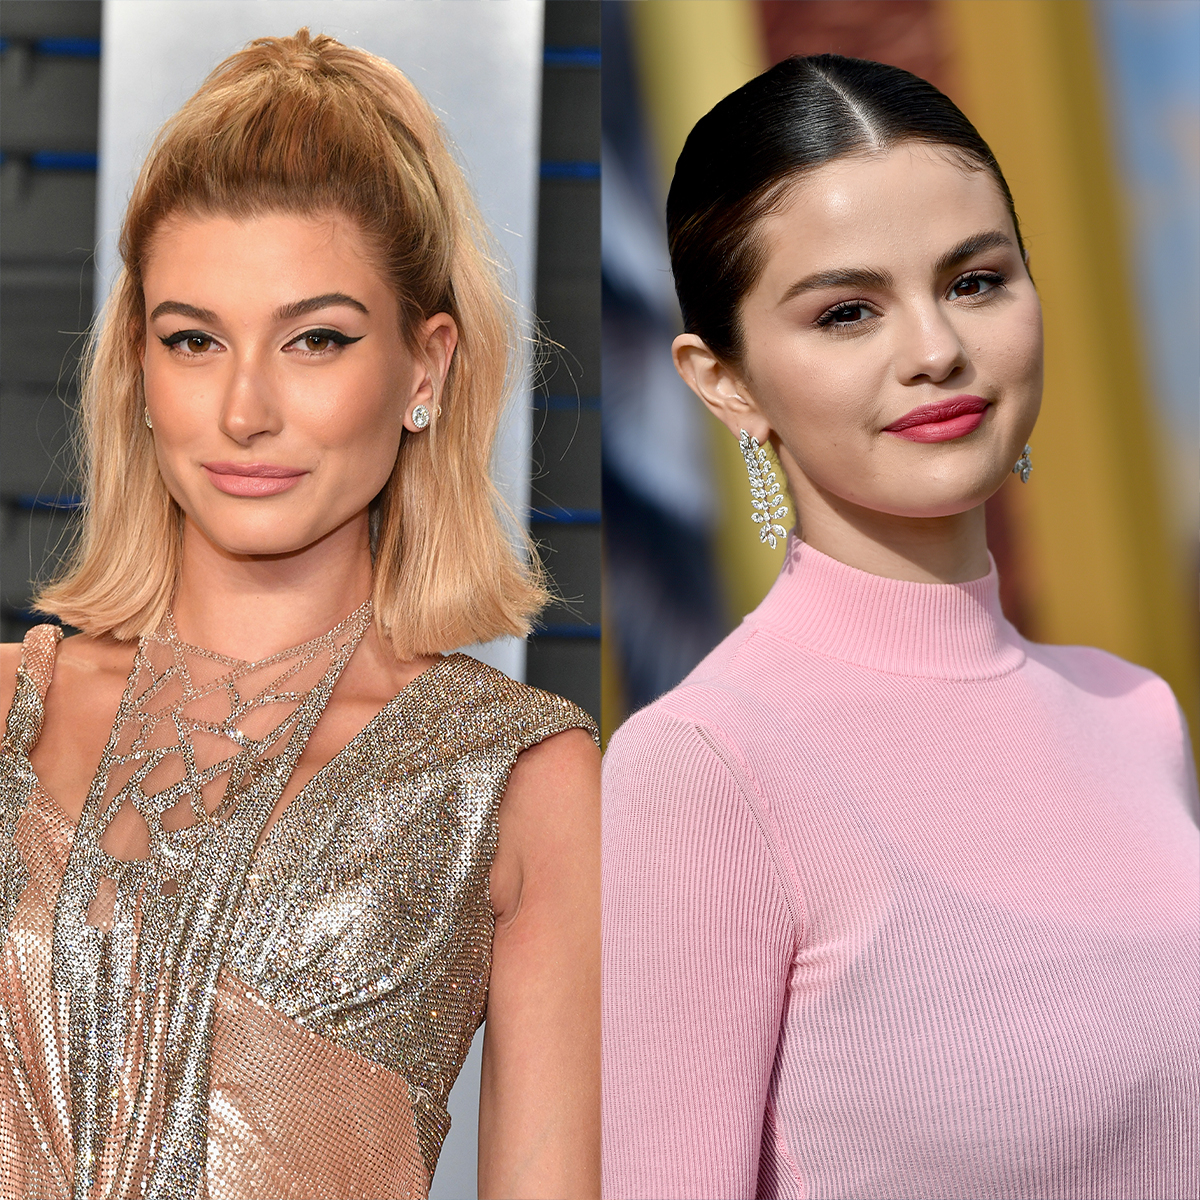 Selena Gomez Apologizes After Fans Accuse Her of Shading Hailey Bieber